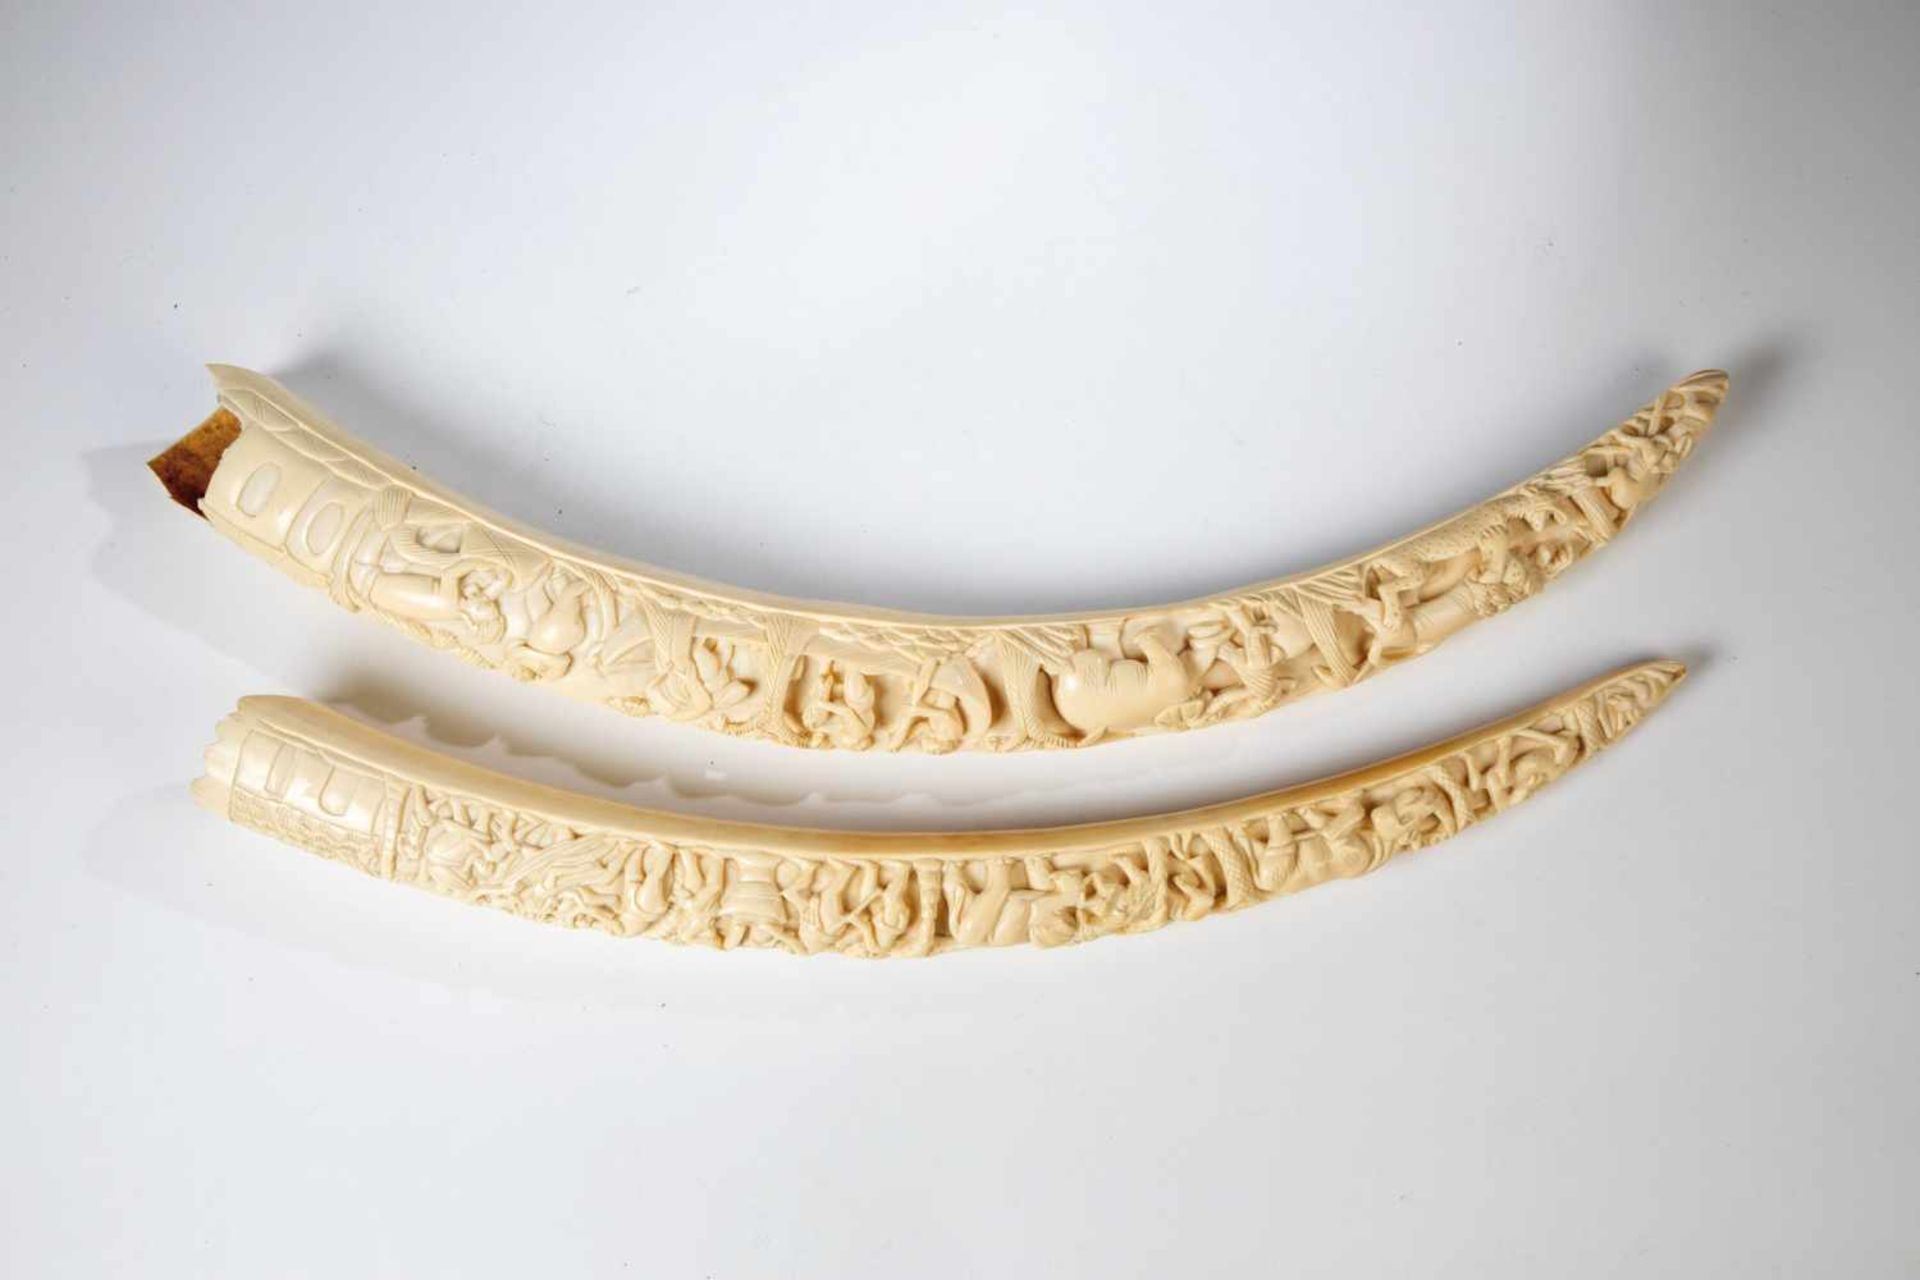 Two tusks. Africa, around 1920. Front relief carving depicting animals and humans. Ivory.Minimum.